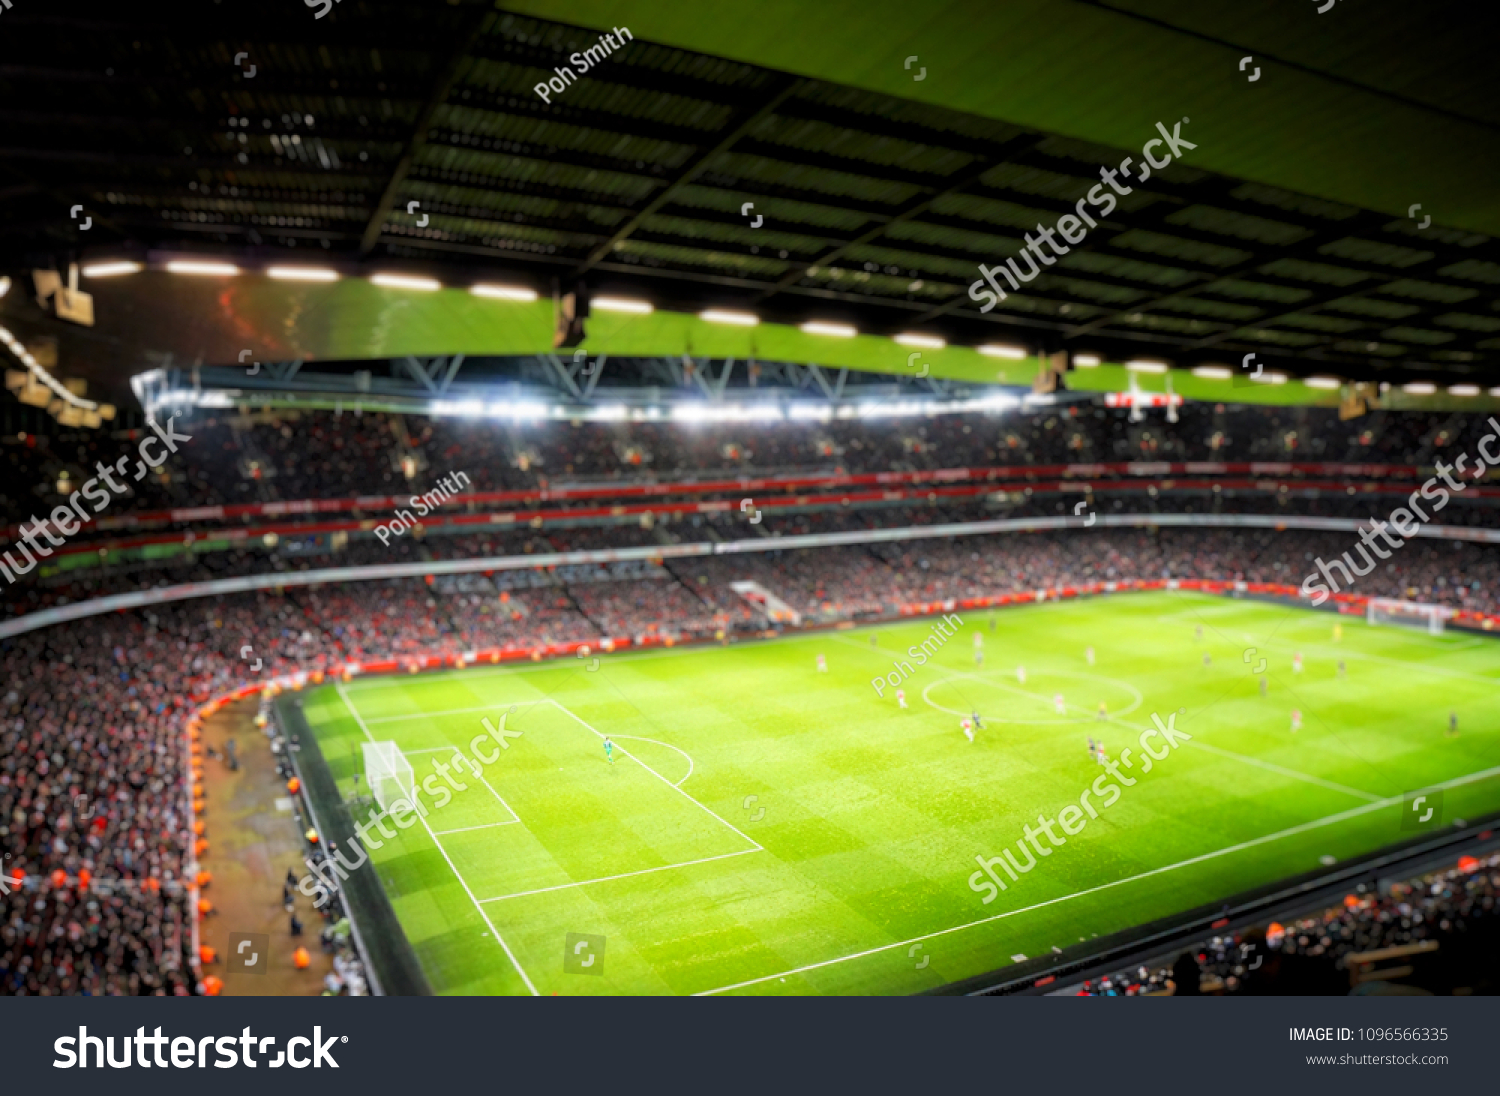 Blurred background of football players playing and soccer fans in match day on beautiful green field with sport light at the stadium.Sports,Athlete,People Concept.Arsenal,Emirates Stadium. #1096566335